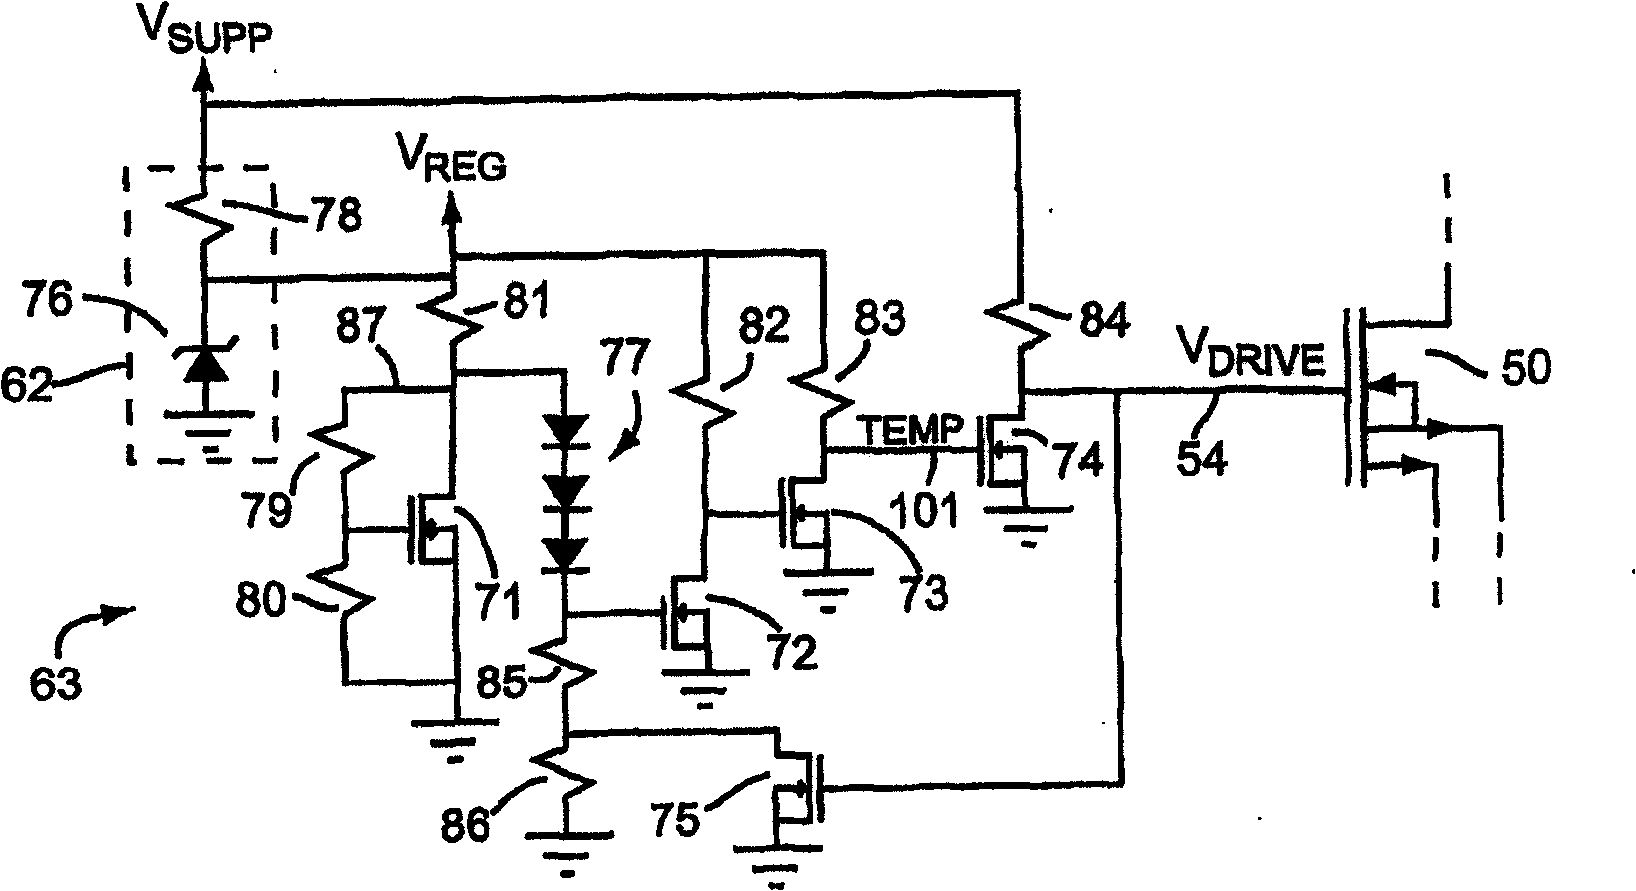 Integrated inrush current limiter circuit and method